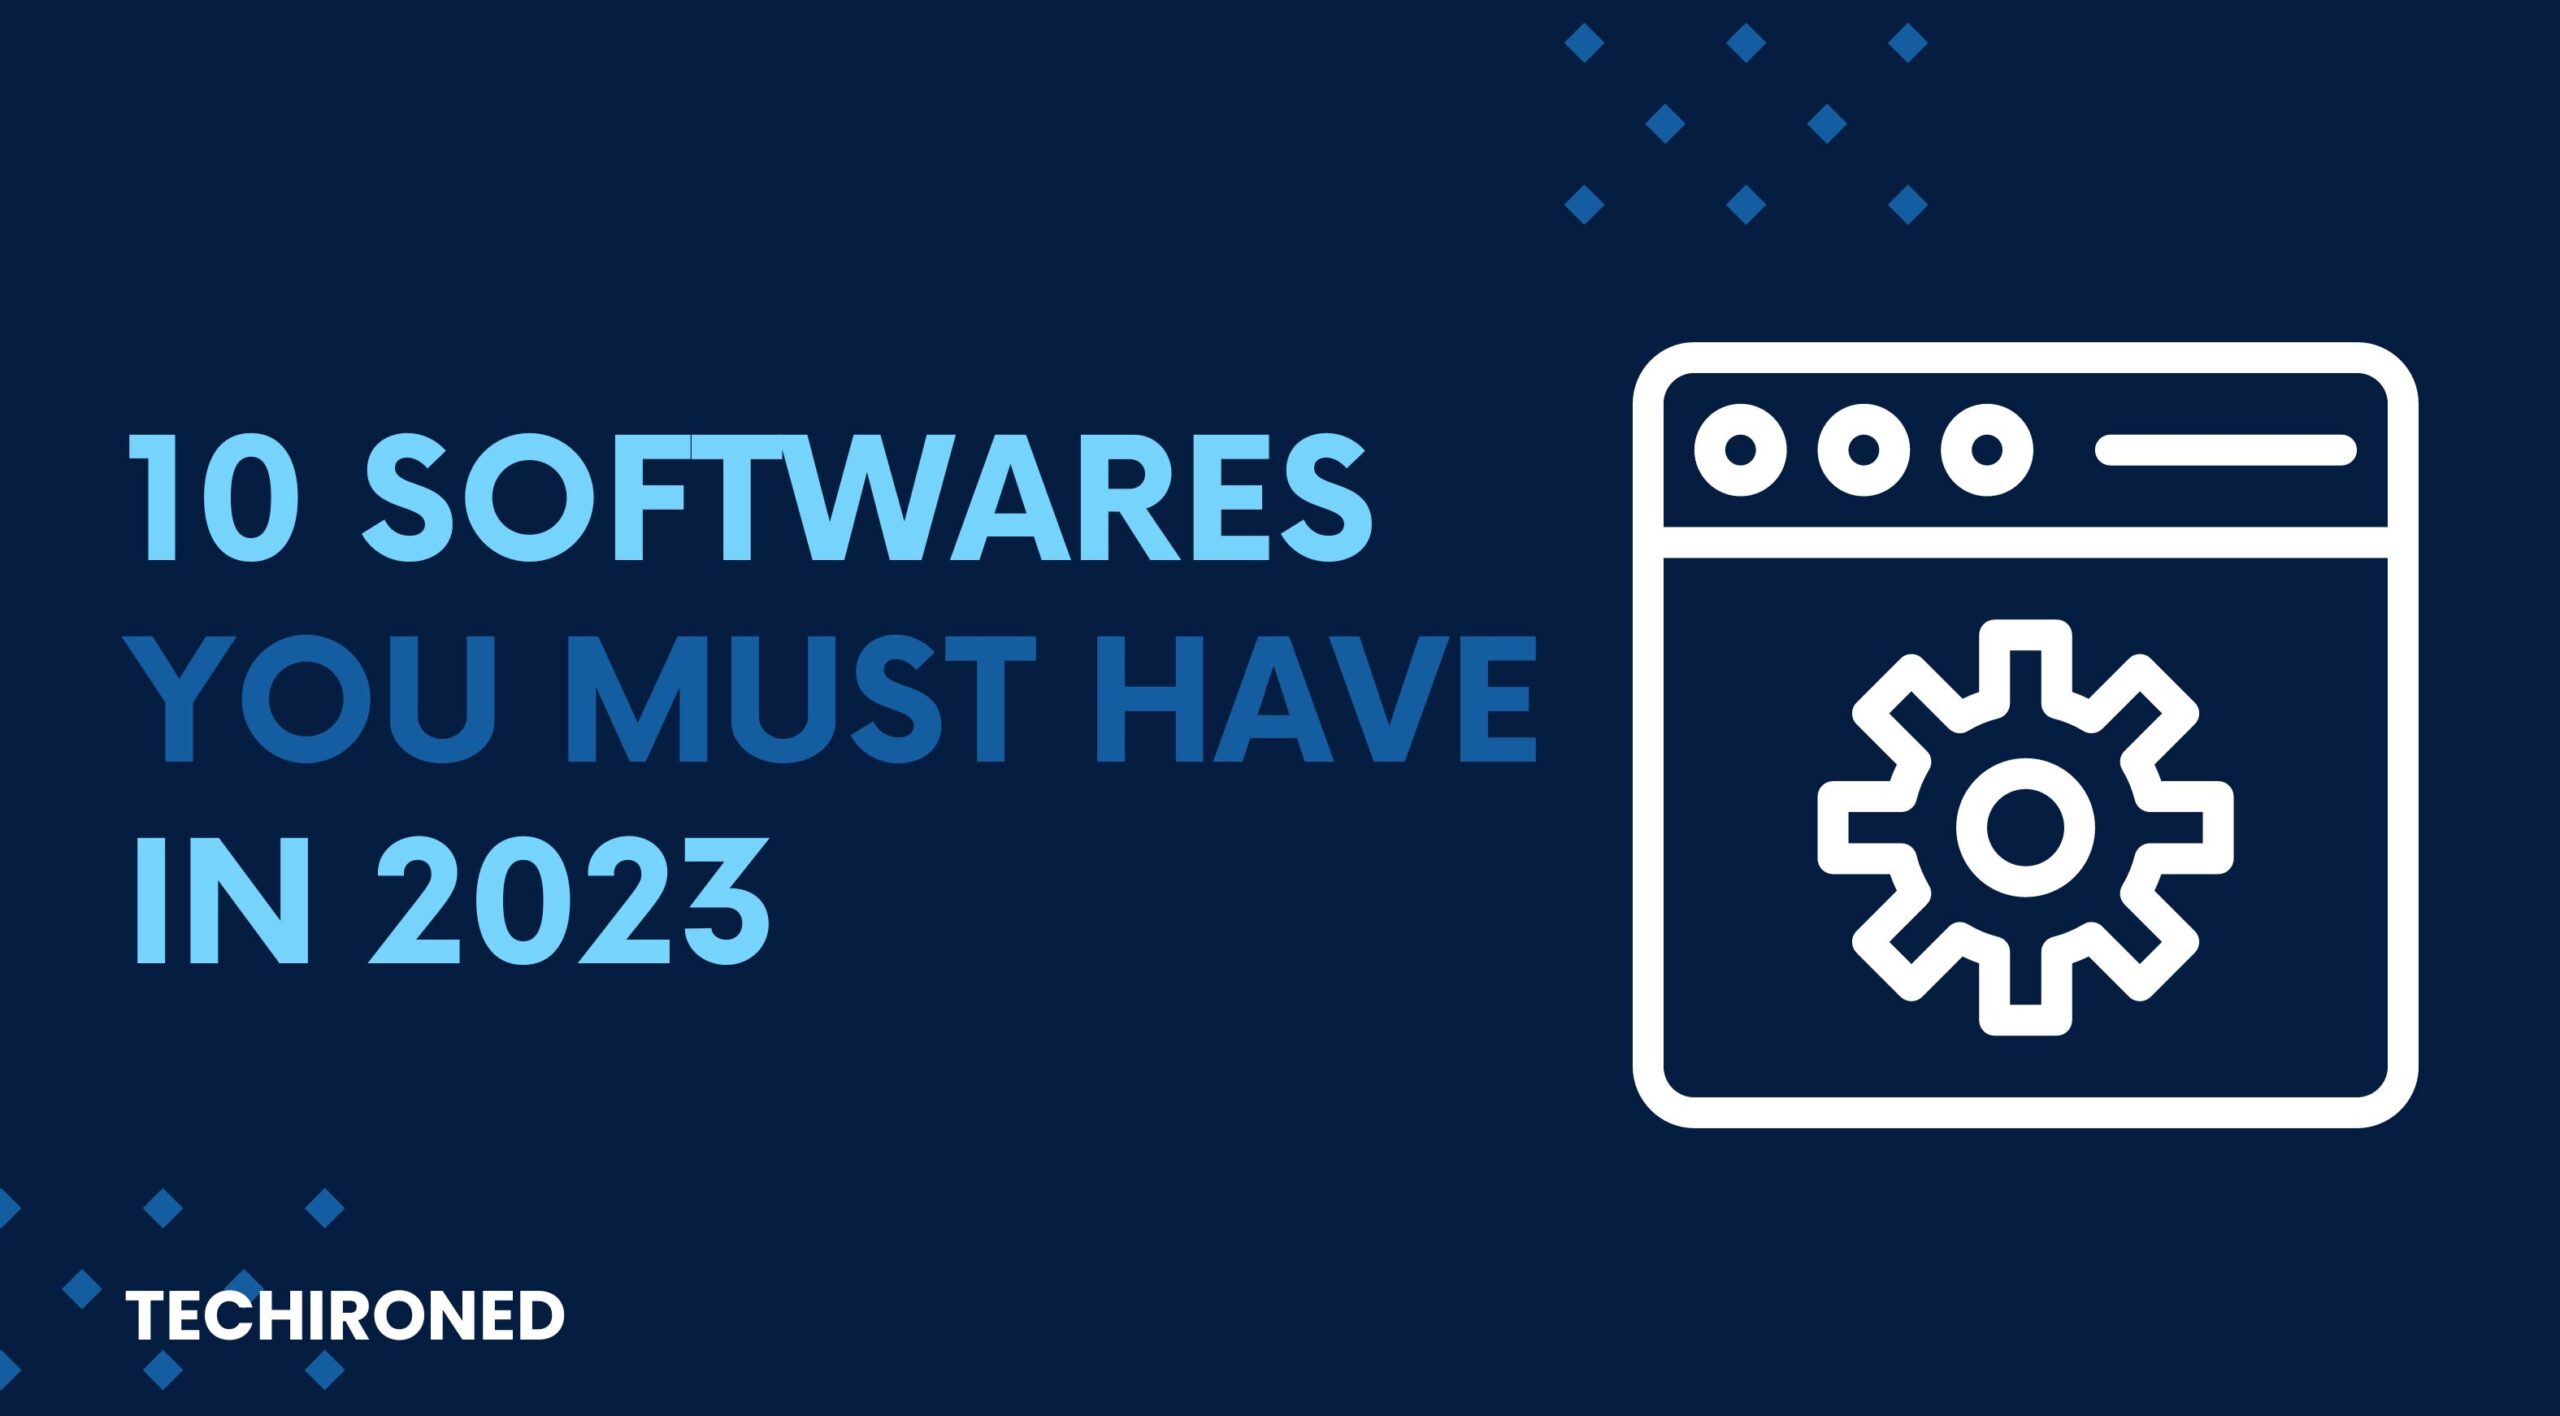 10 software you must have in 2023